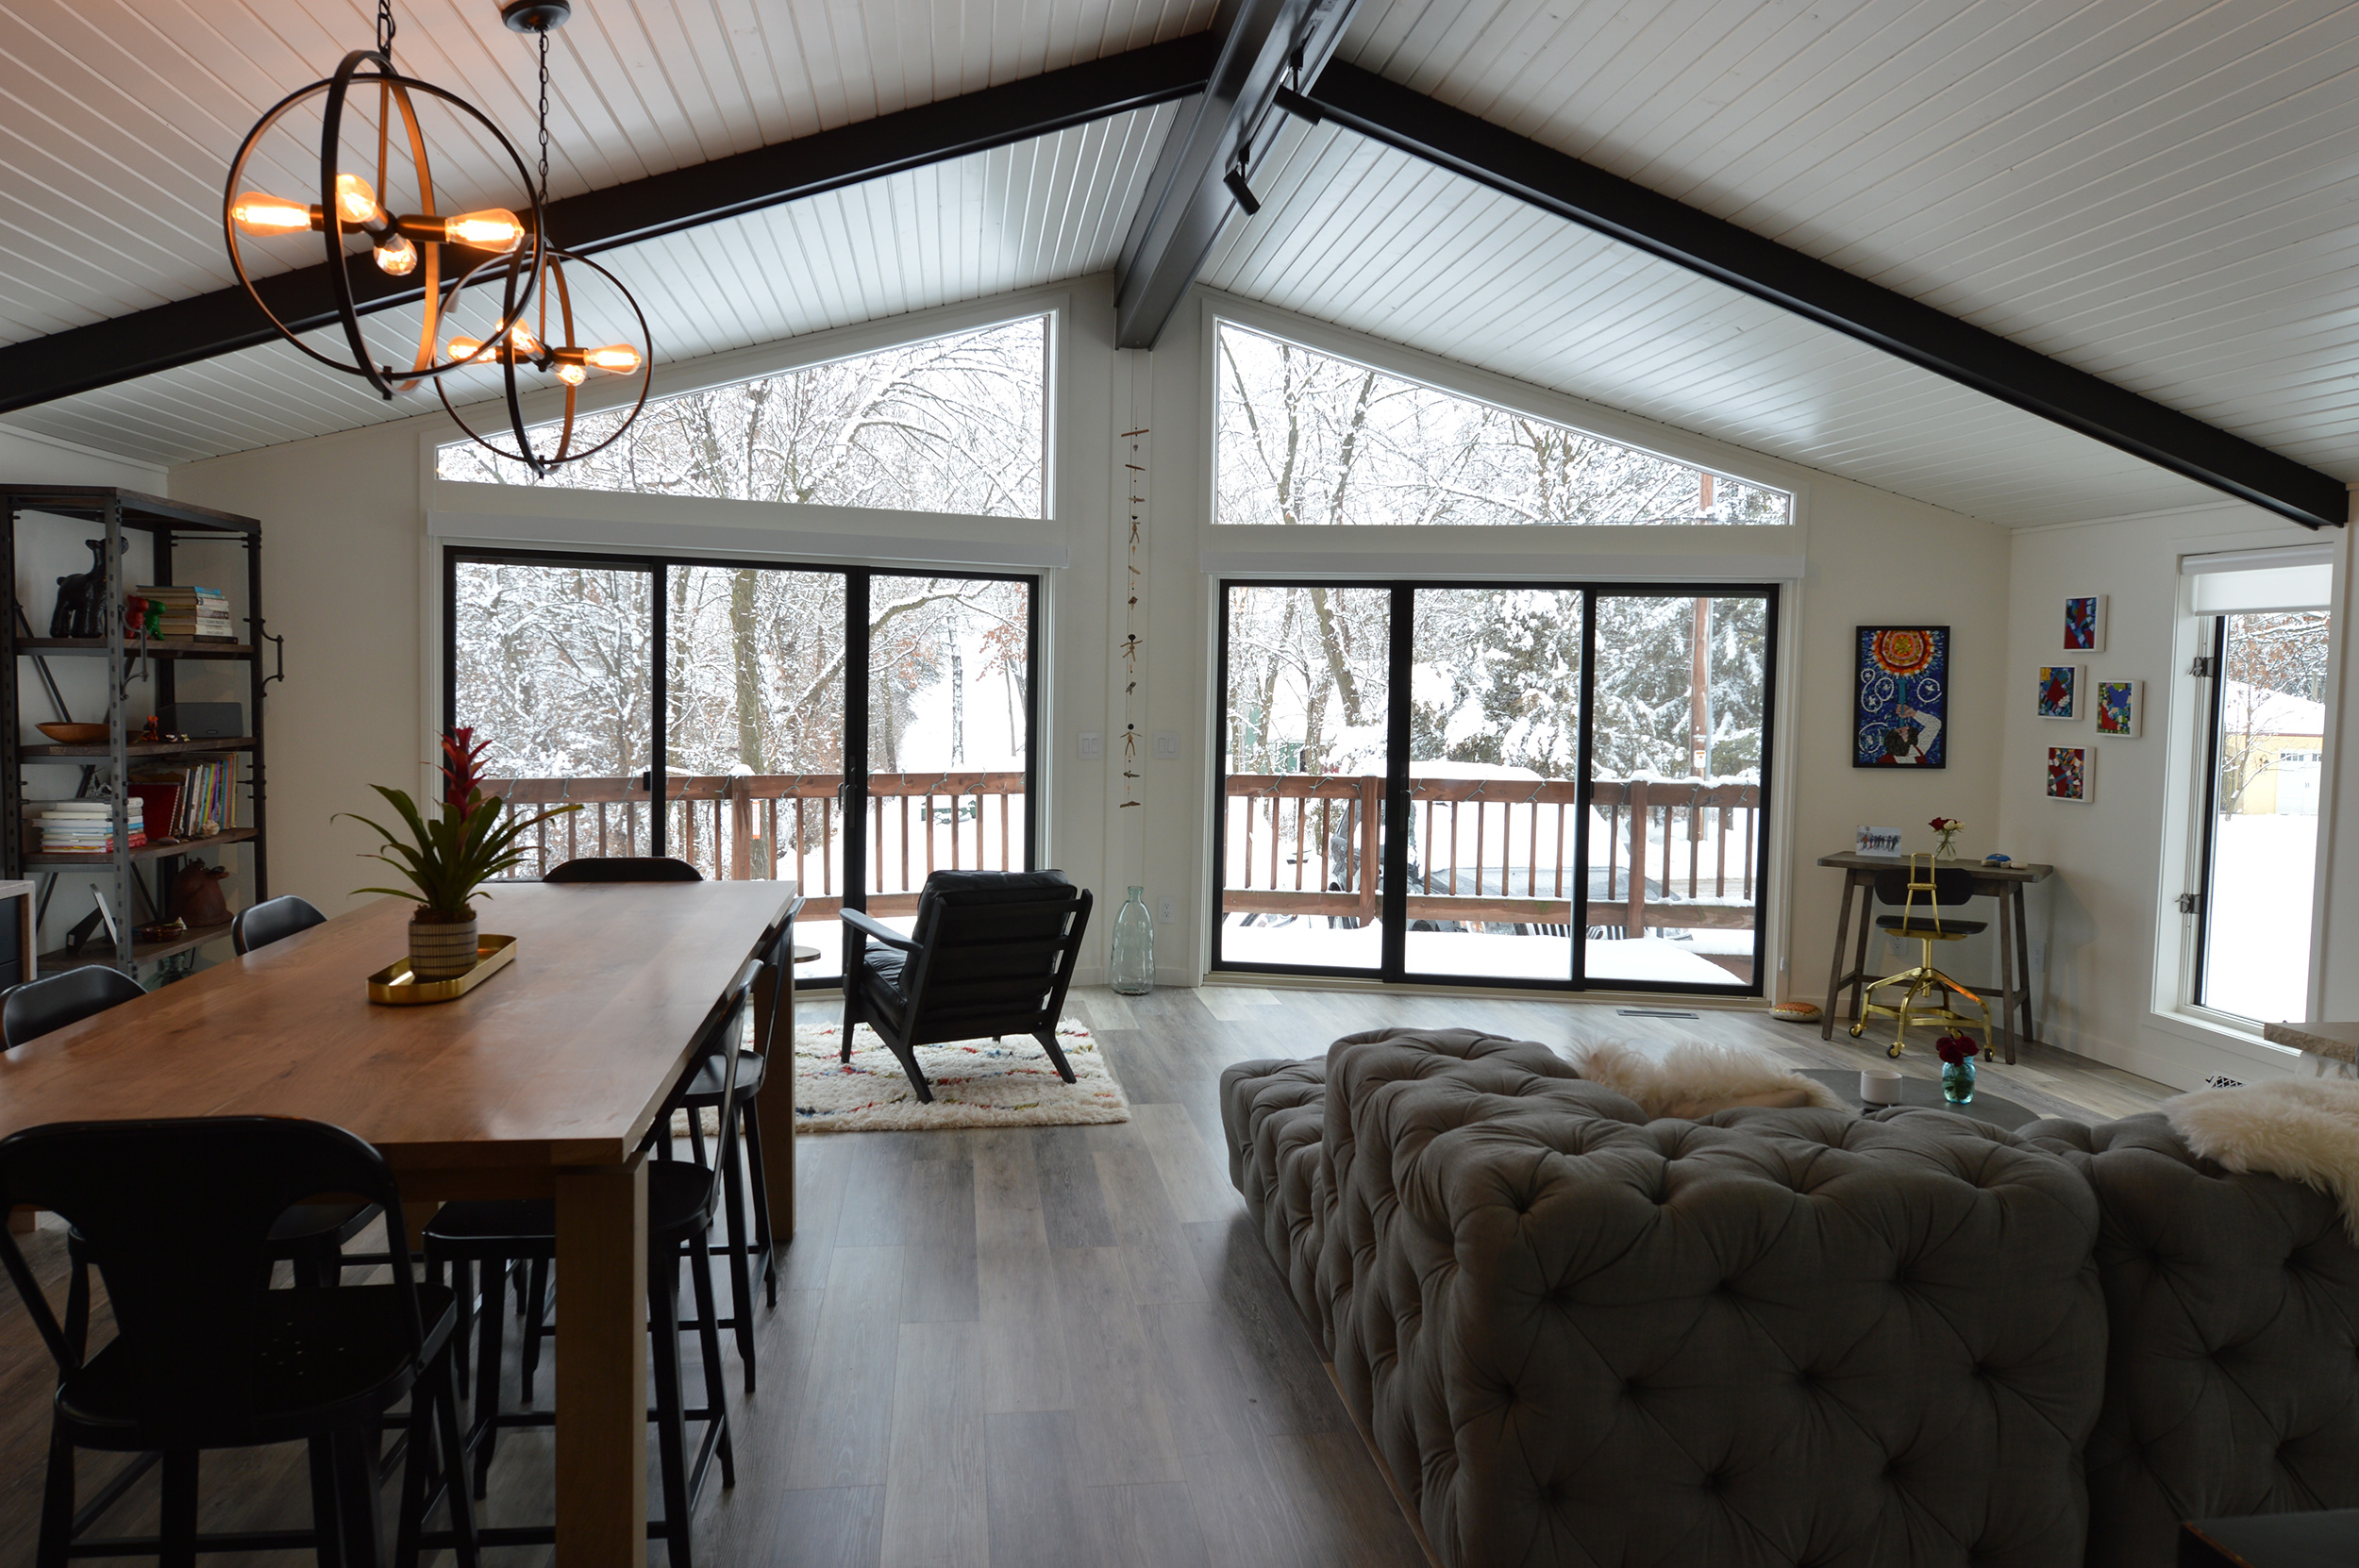 a snowy day as viewed from living and dining area in this remote home